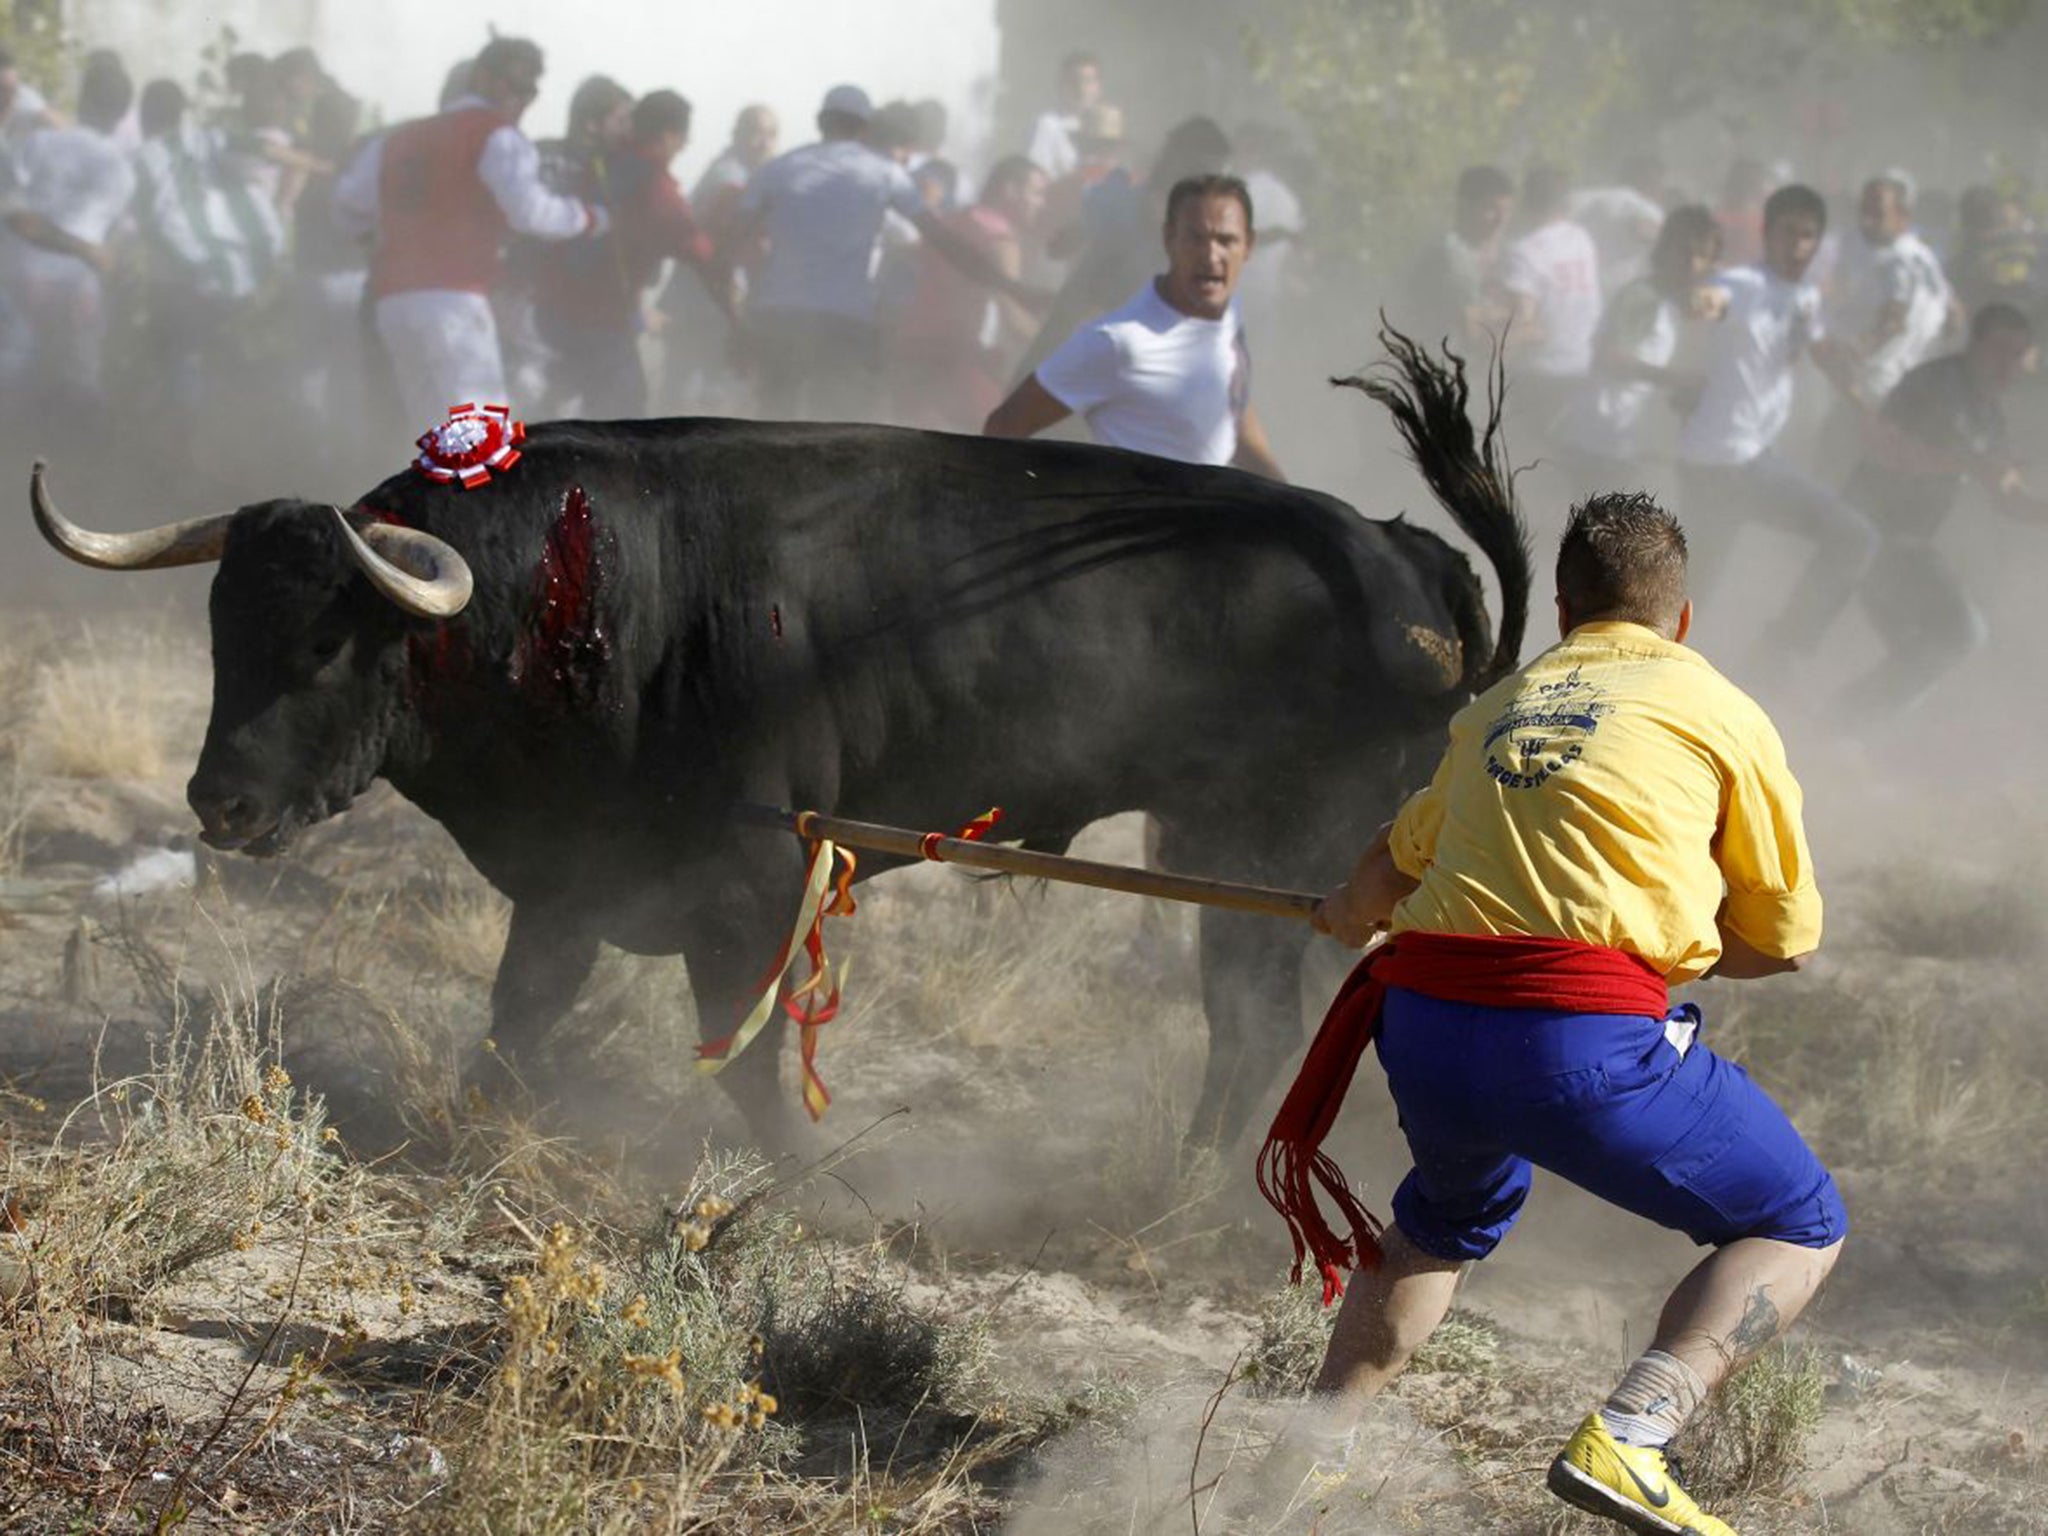 The Toro del la Vega event in Tordesillas has its roots, reputedly, in the 15th century